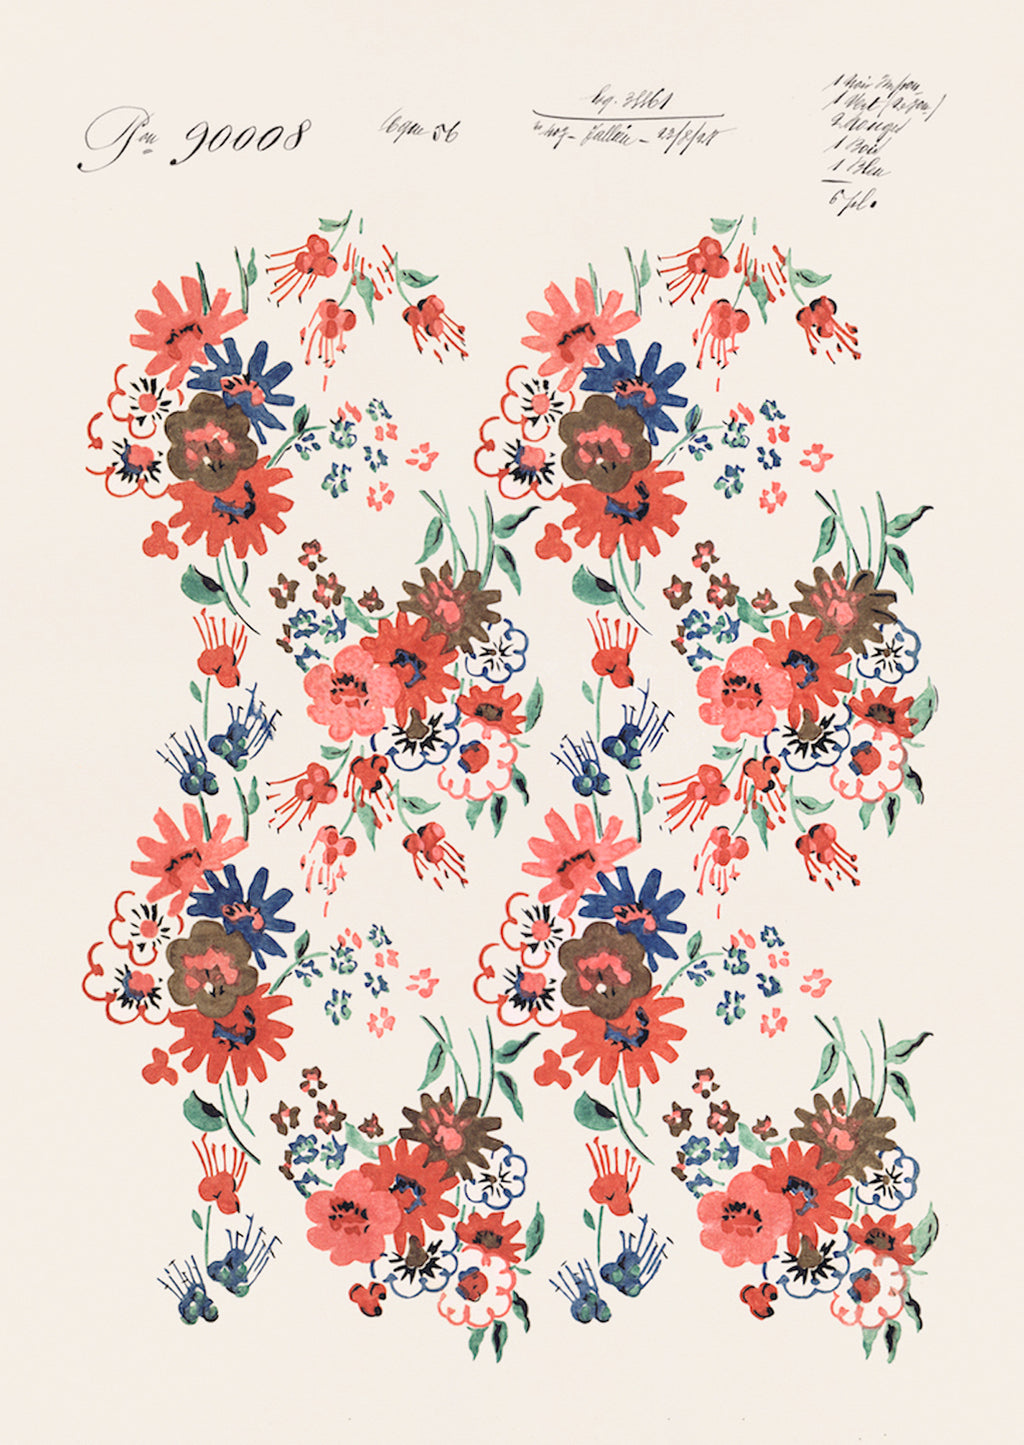 1: An antique inspired floral poster print in red, pink and blue.